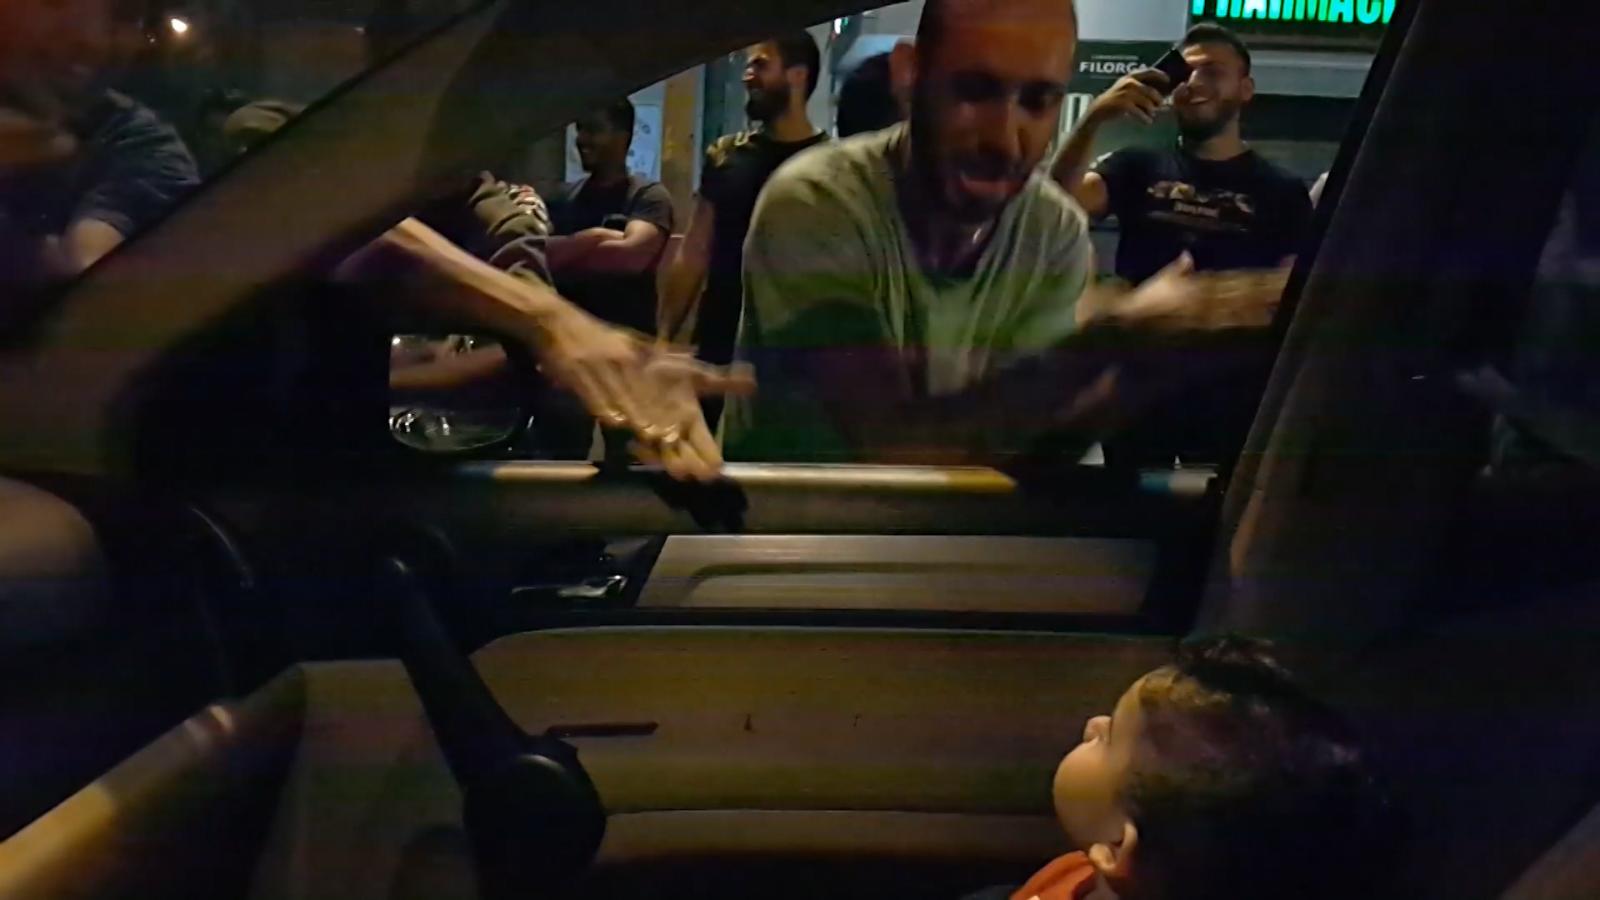 A Lebanese Mother Told Protesters Her Baby Was Scared So They